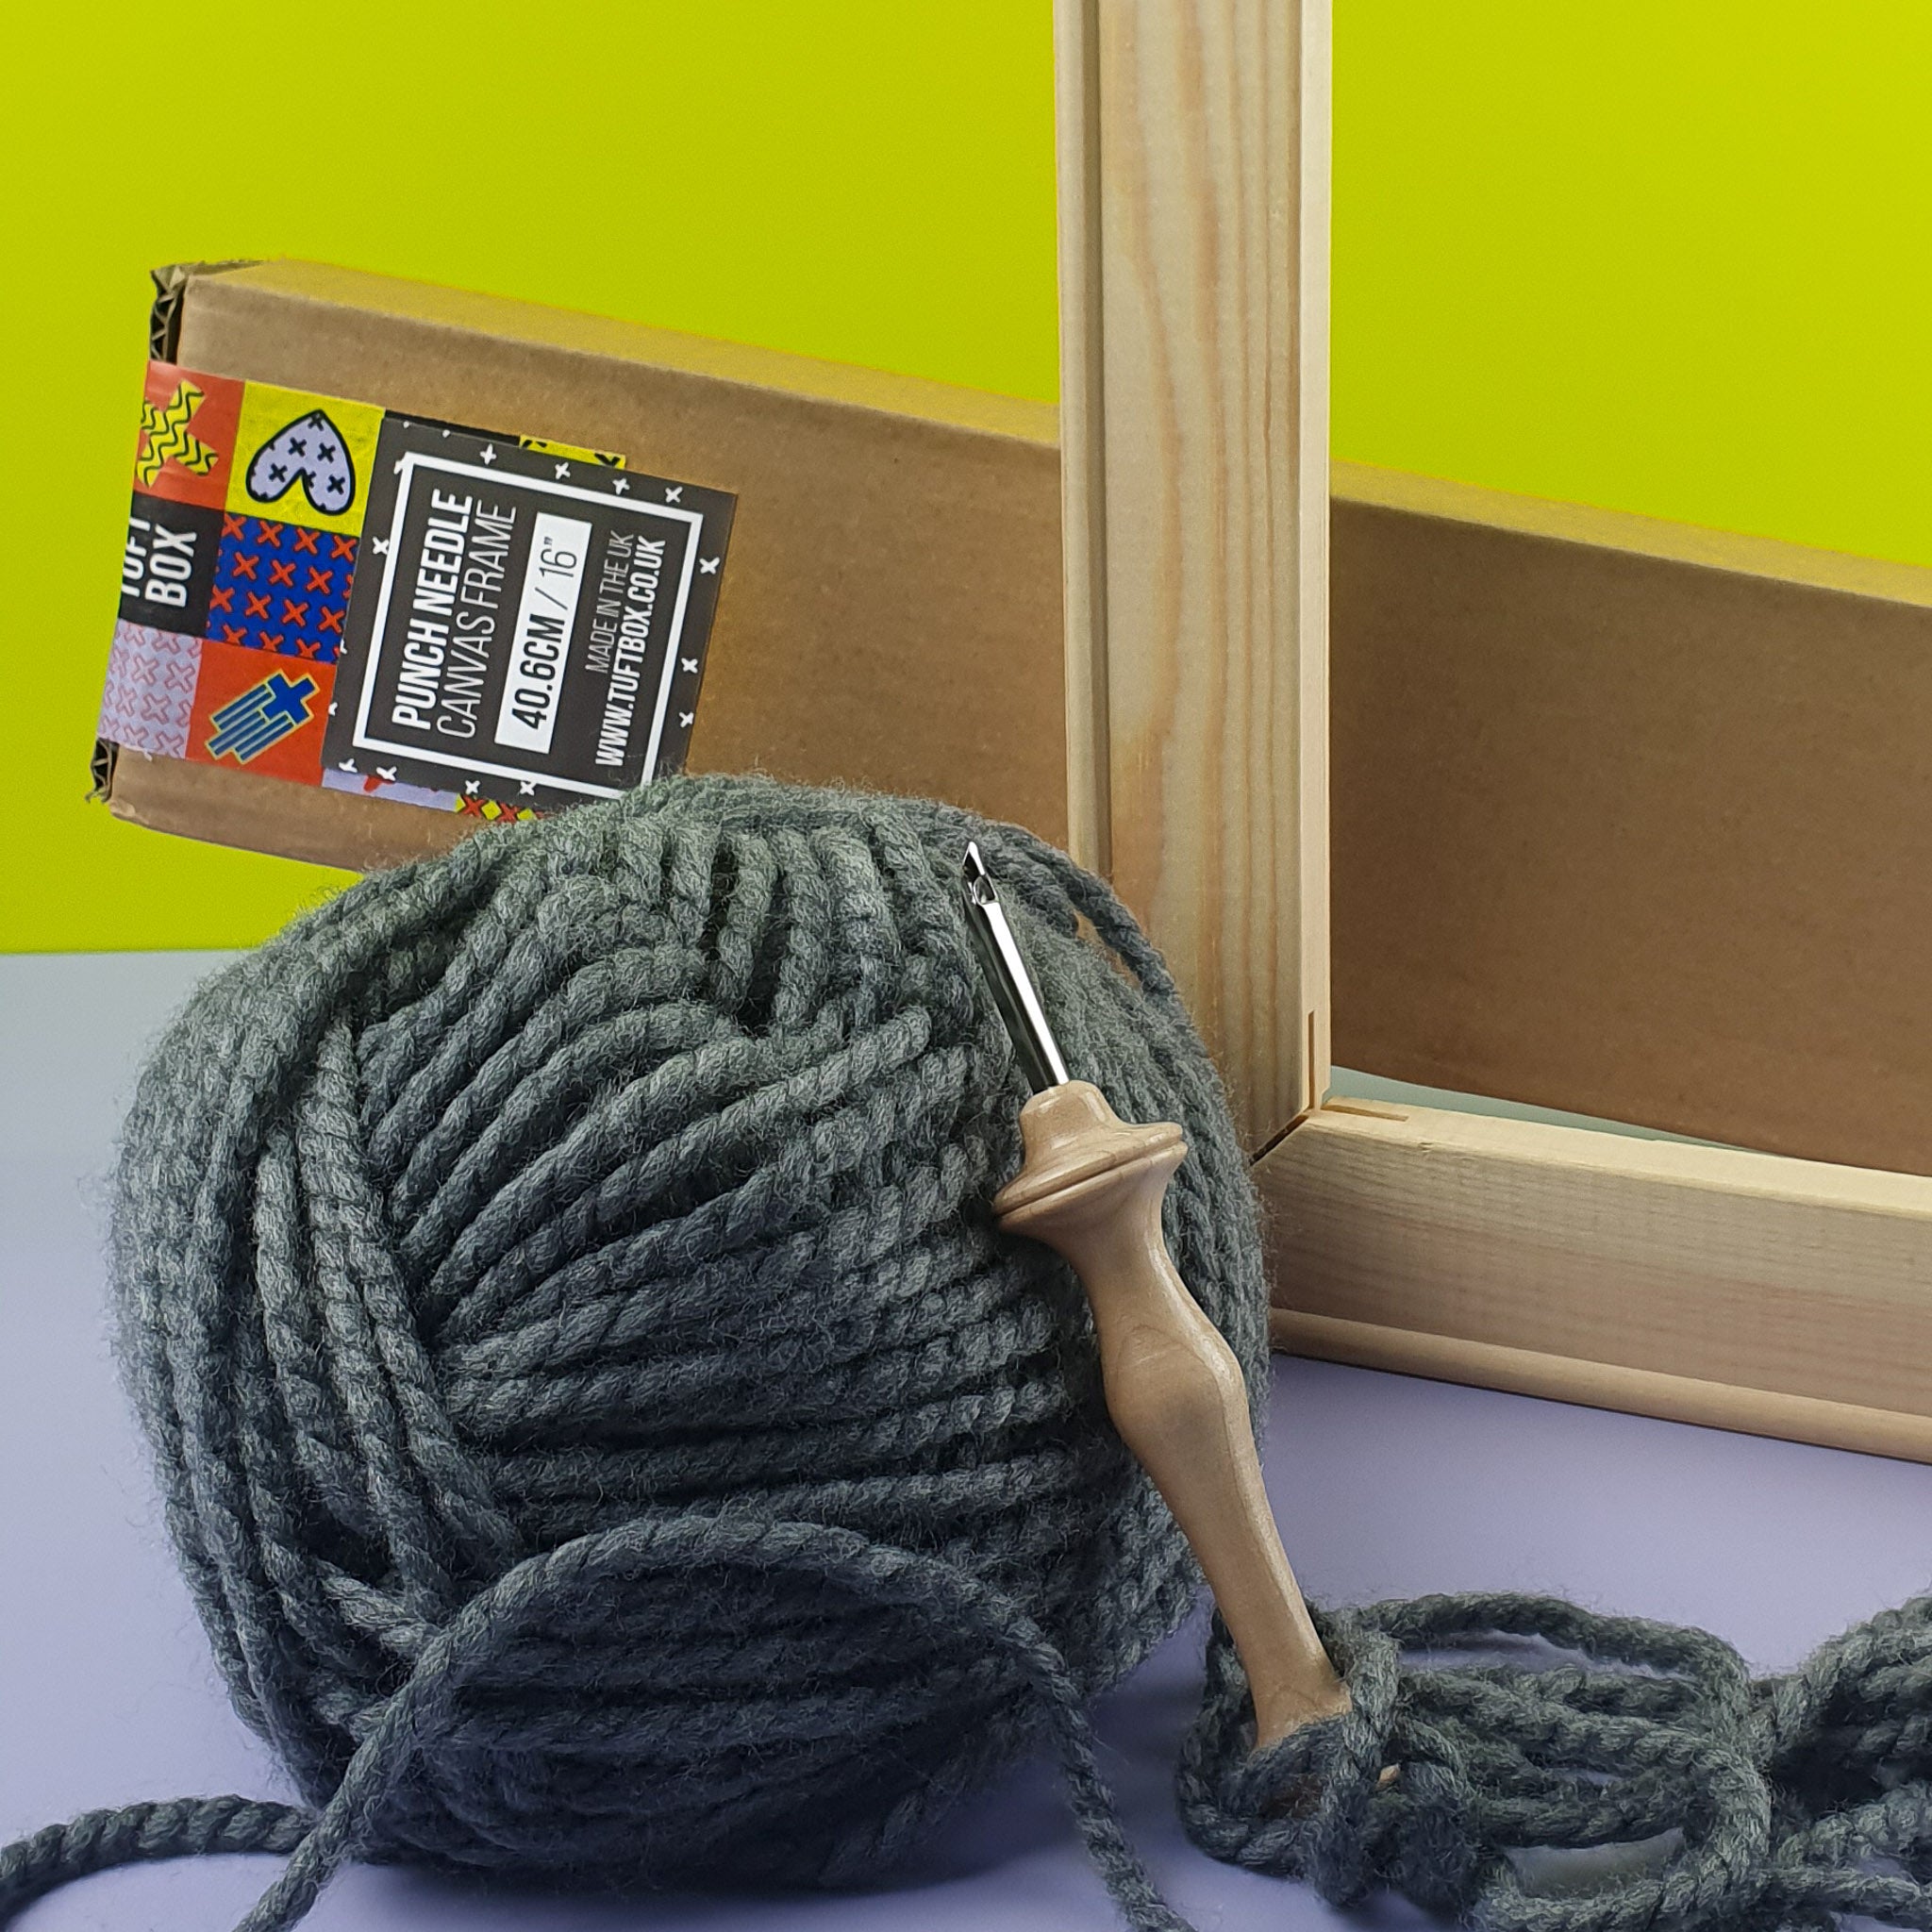 Punch Needle Canvas Frame with ball of yarn